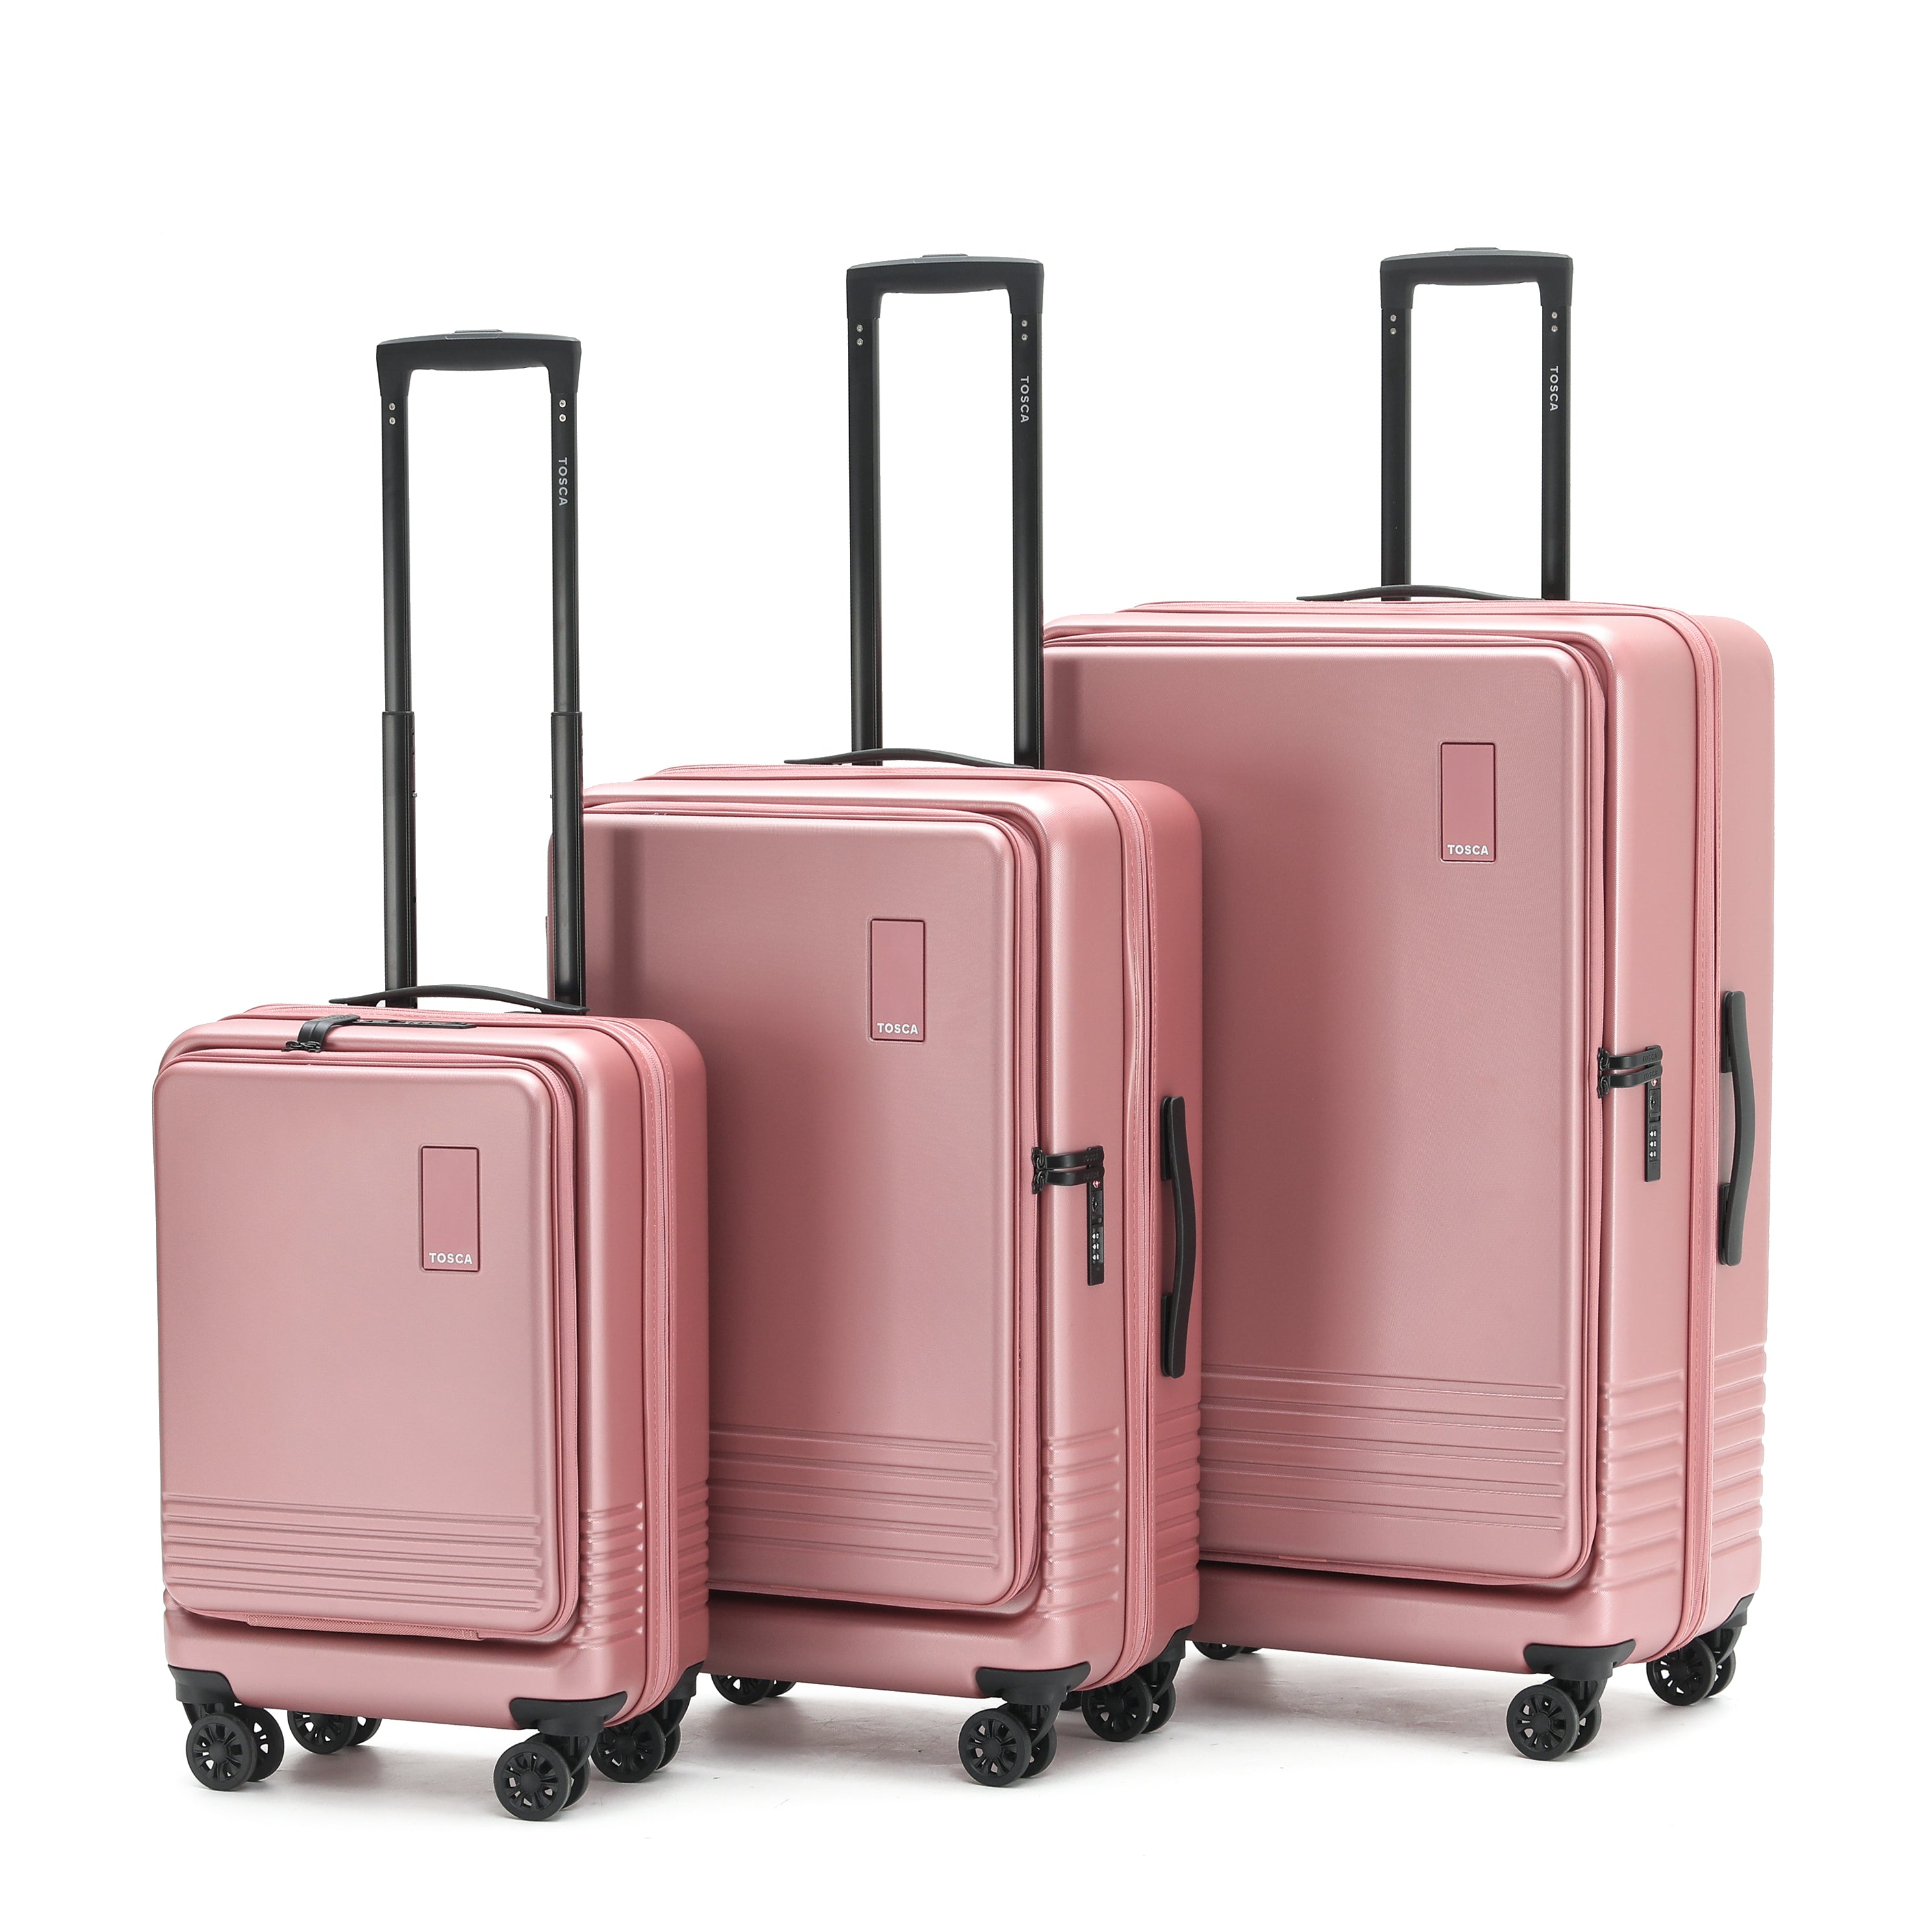 Tosca - TCA644 Horizon Front lid opening Set of 3 suitcases - Dusty Rose - 0